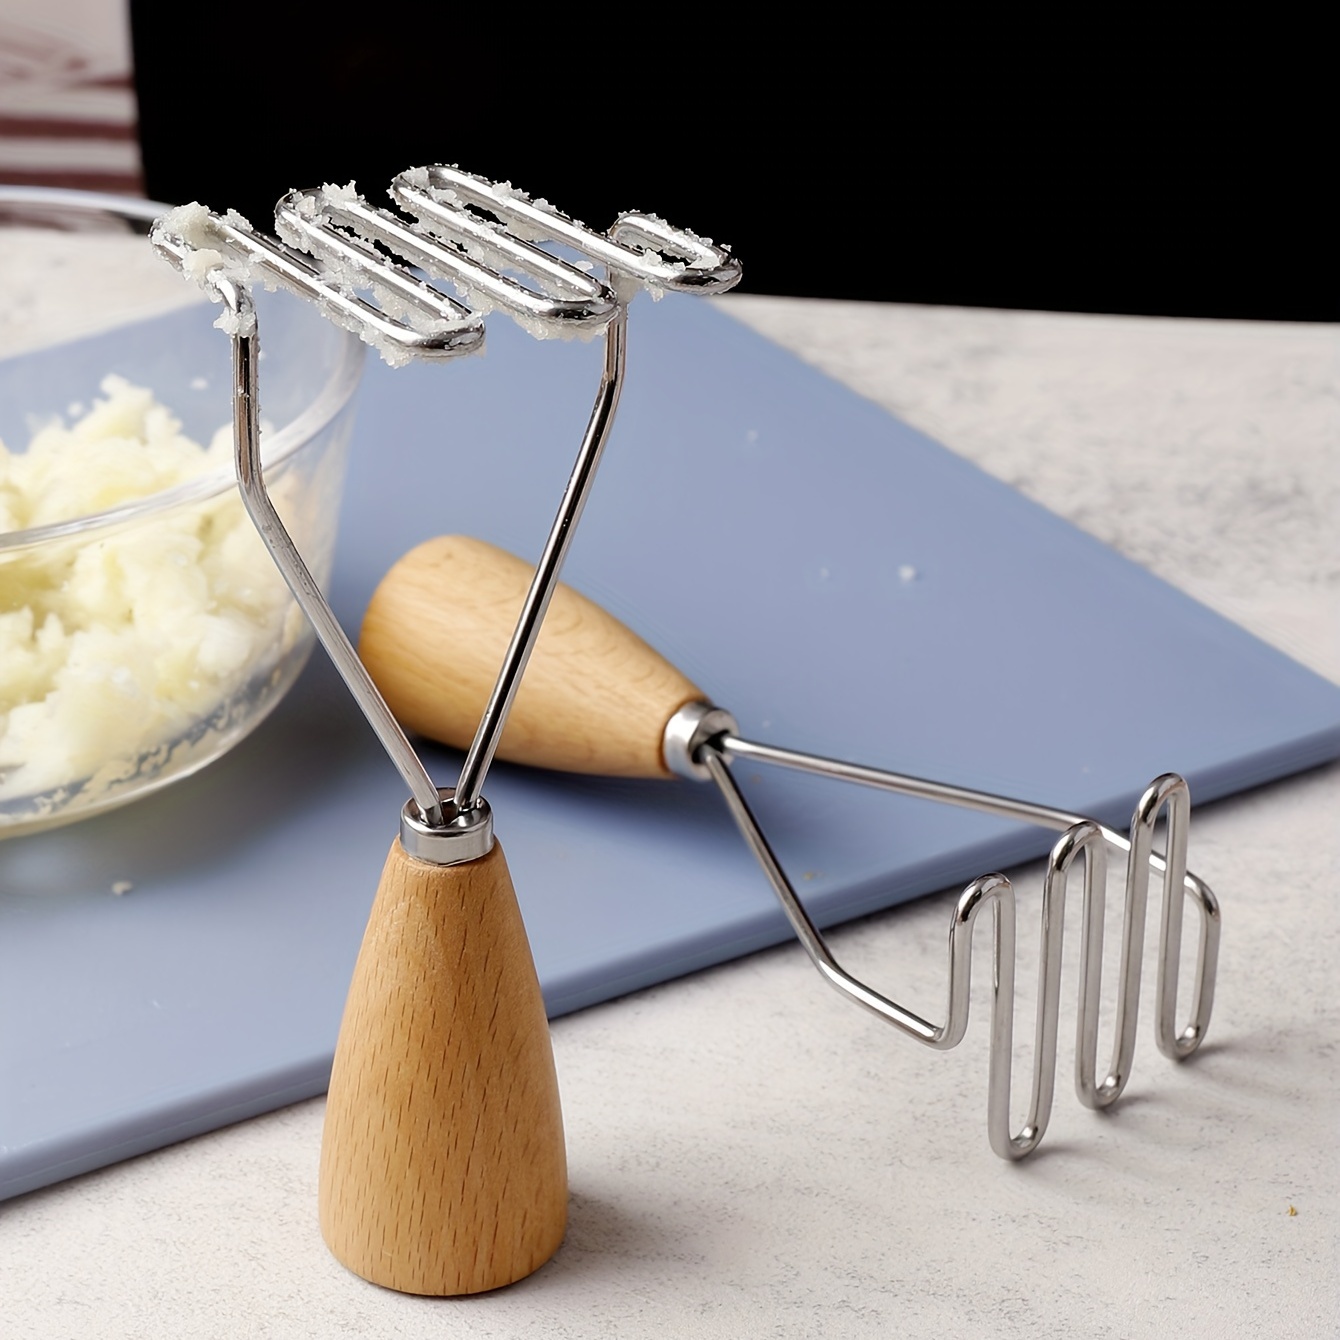 Food Masher with Wooden Handle, Kitchenware